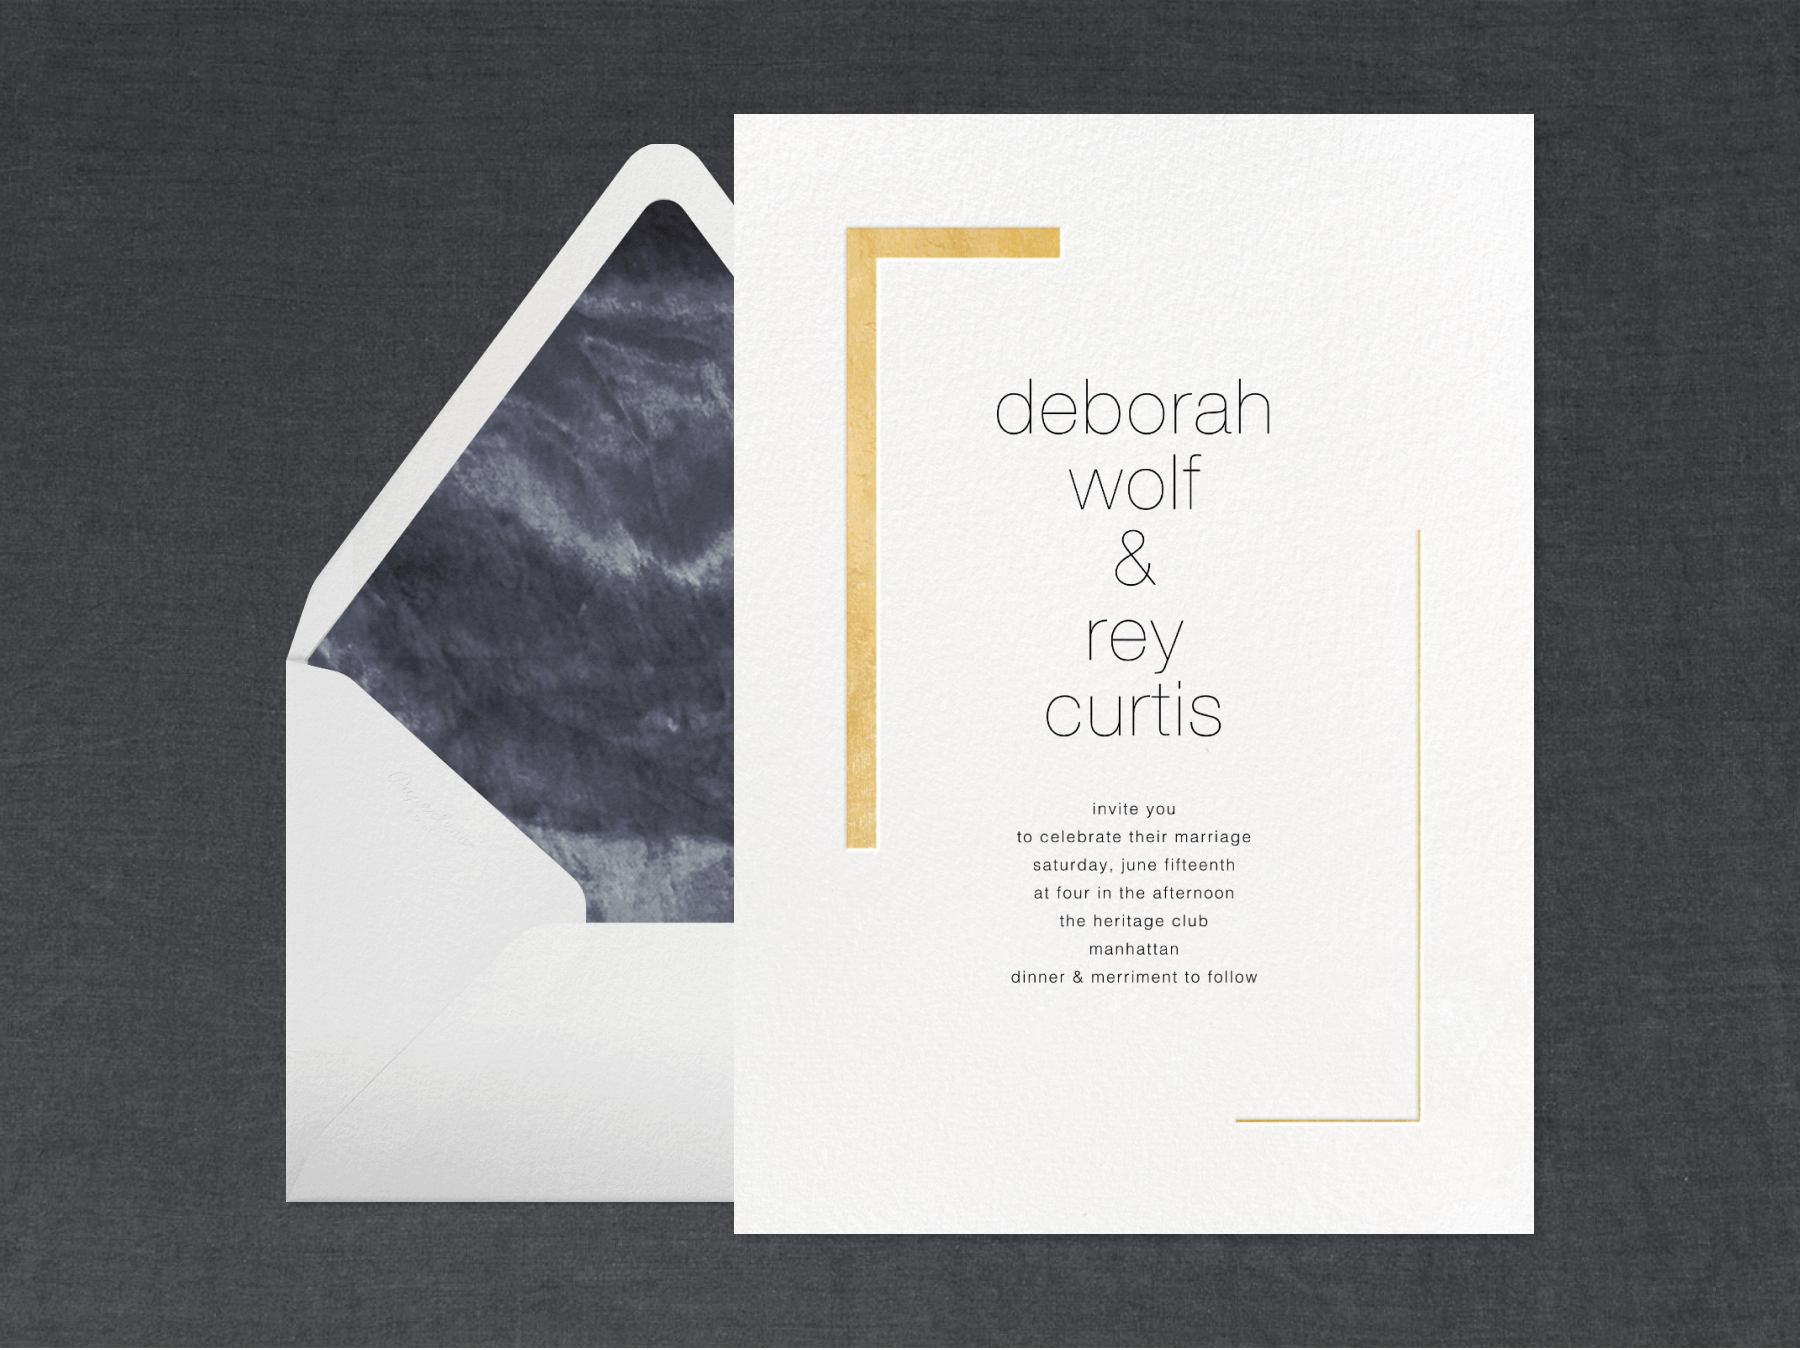 A white minimalist wedding invitation with two gold corners framing the couple’s names beside a white envelope with a black tie-dyed liner on a black background.